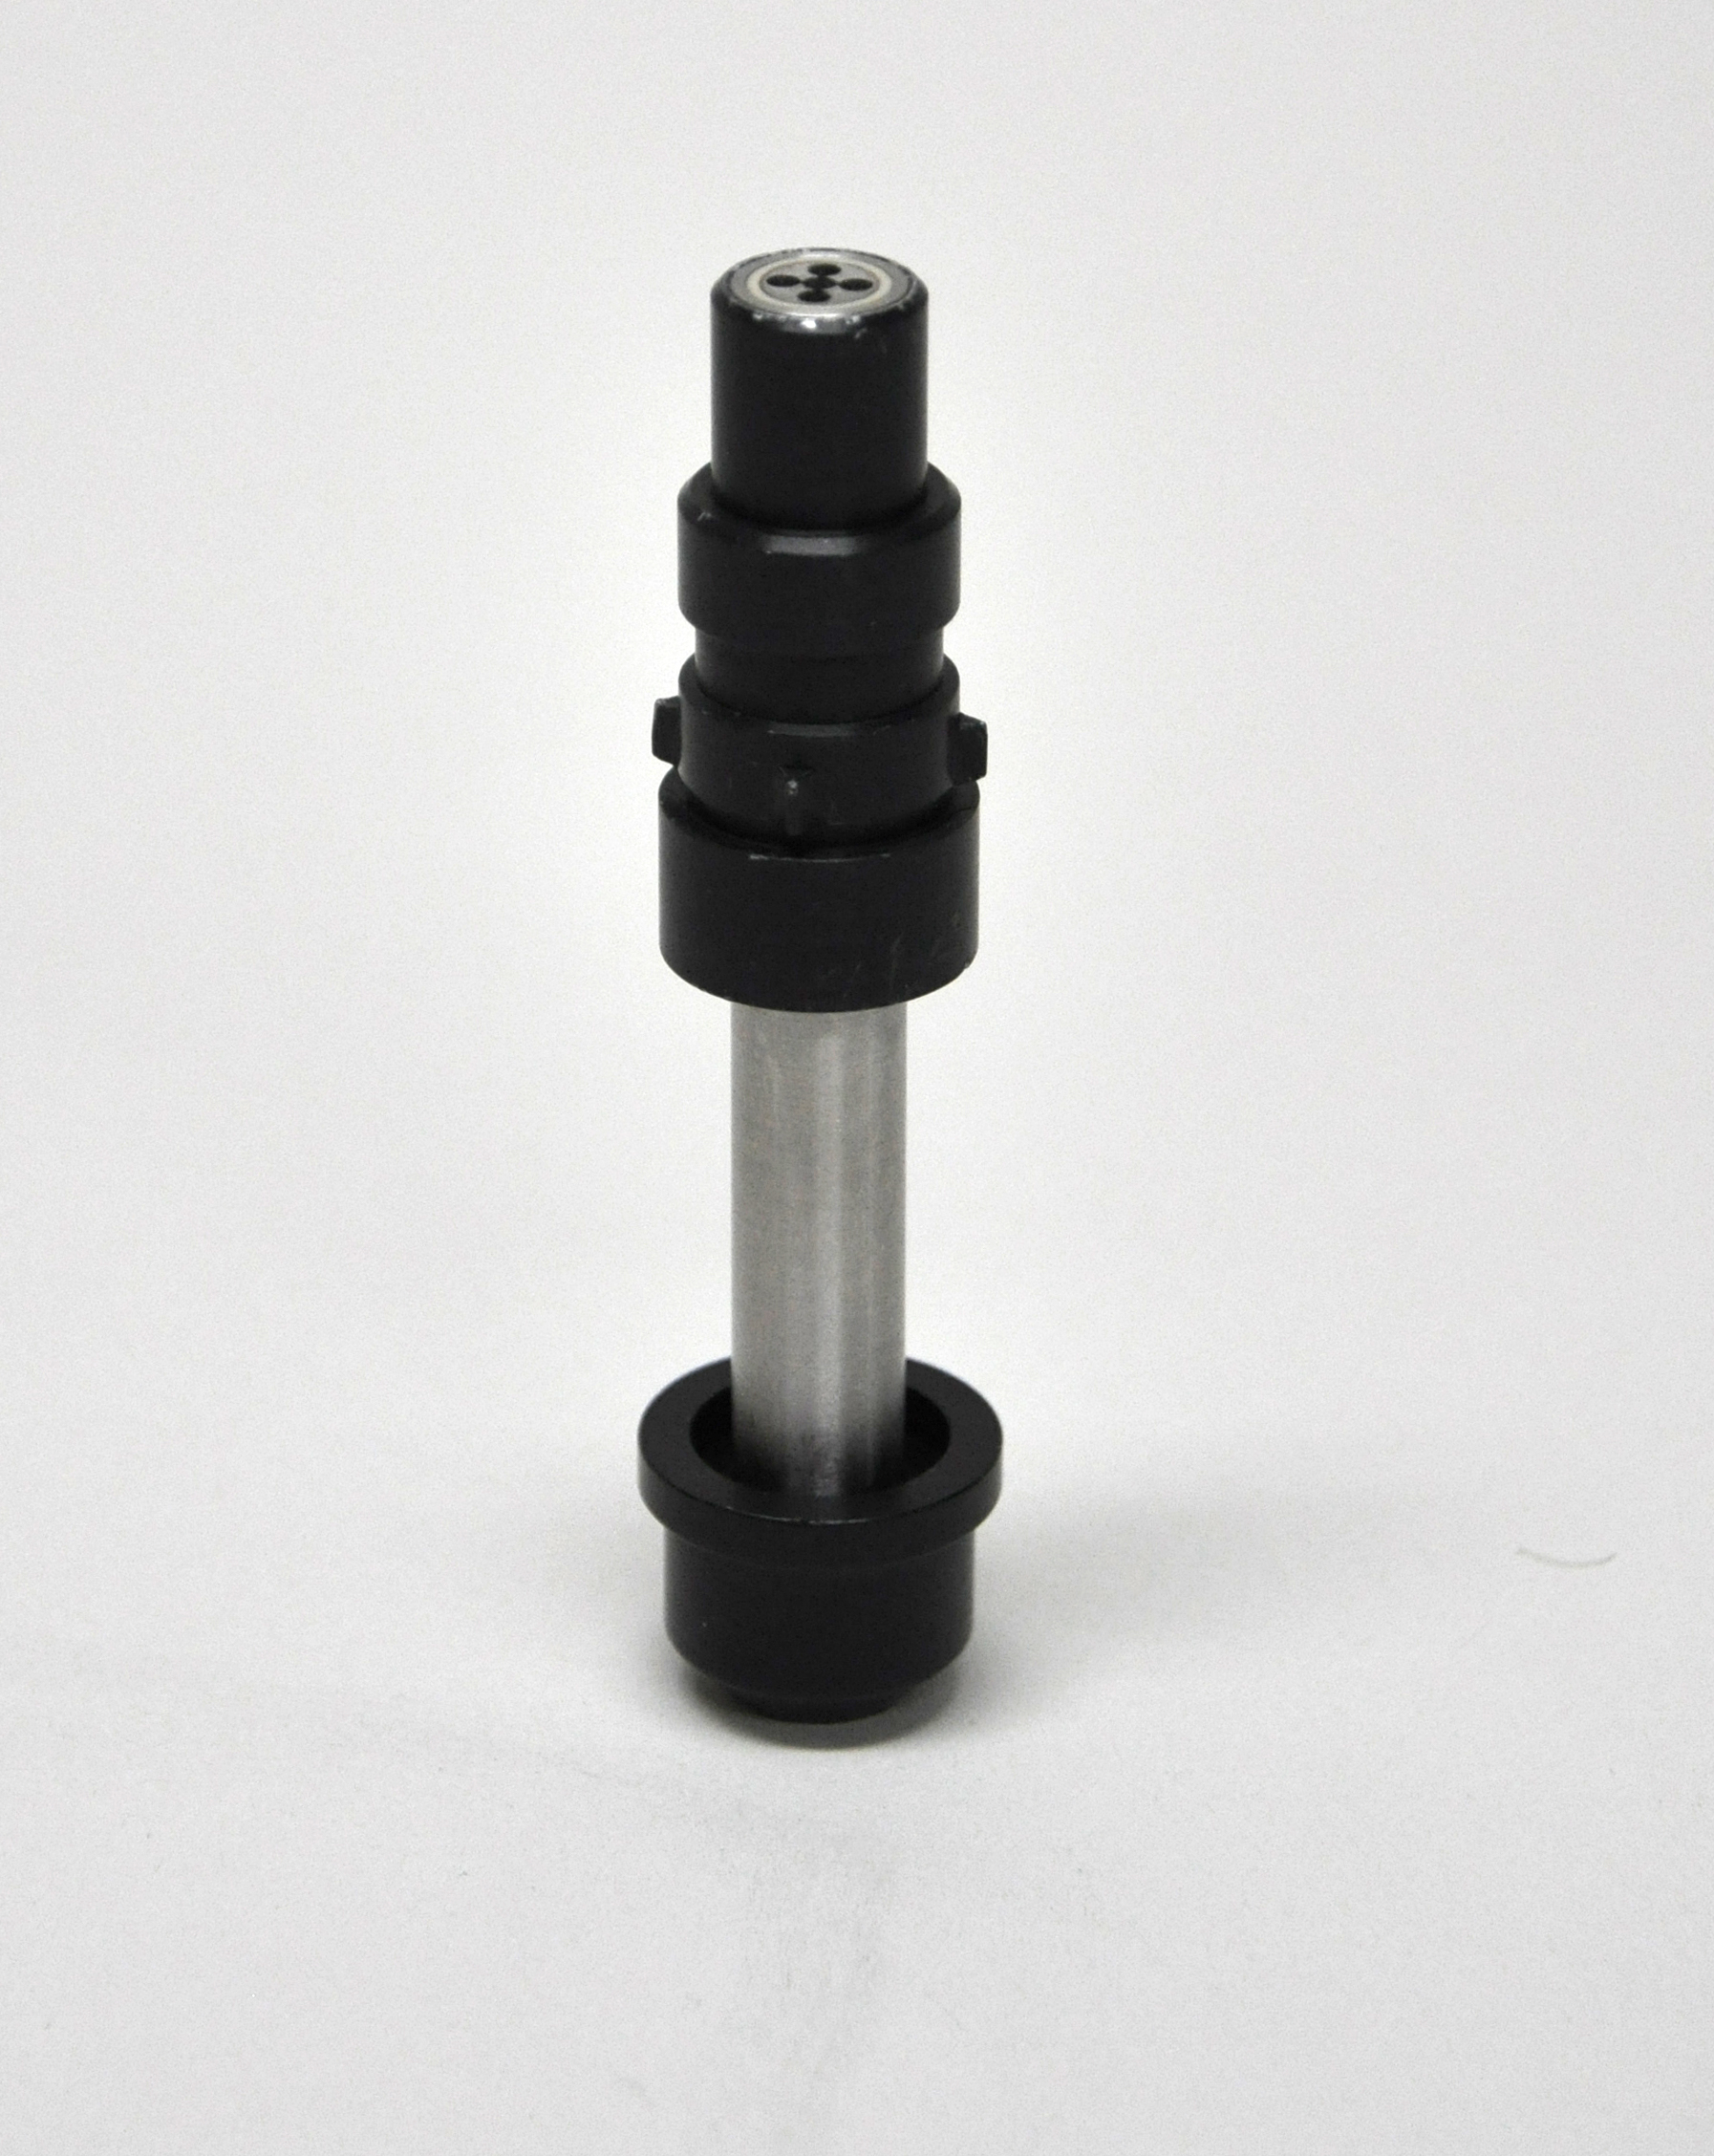 Frame Adapter for Leksell Stereotactic System®